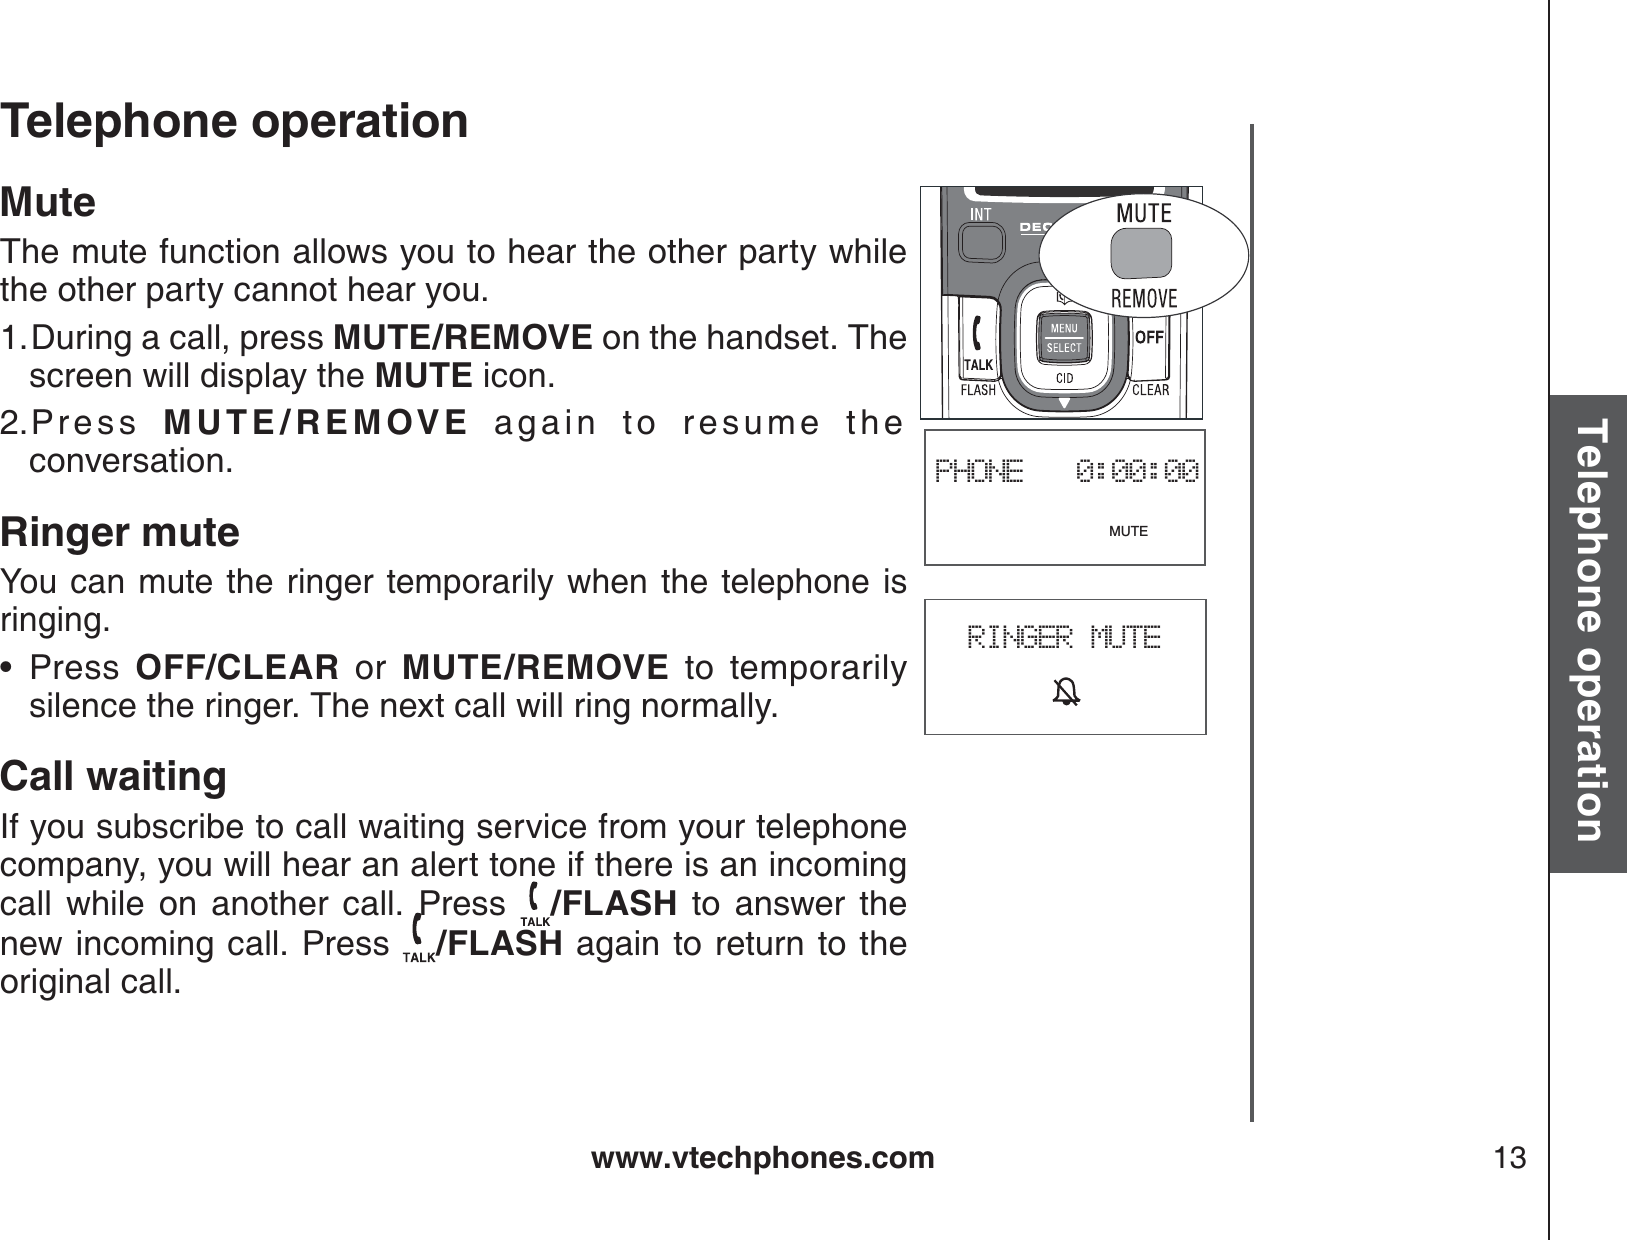 www.vtechphones.com 13Basic operationTelephone operationTelephone operationPHONE   0:00:00                              MUTEMuteThe mute function allows you to hear the other party while the other party cannot hear you.During a call, press MUTE/REMOVE on the handset. The screen will display the MUTE icon.Press  MUTE/REMOVE again to resume the conversation.Ringer muteYou can mute the ringer temporarily when the telephone isringing.Press OFF/CLEAR or MUTE/REMOVE to temporarily silence the ringer. The next call will ring normally.Call waitingIf you subscribe to call waiting service from your telephone company, you will hear an alert tone if there is an incoming call while on another call. Press  /FLASH to answer the new incoming call. Press  /FLASH again to return to the original call.1.2.•RINGER MUTE